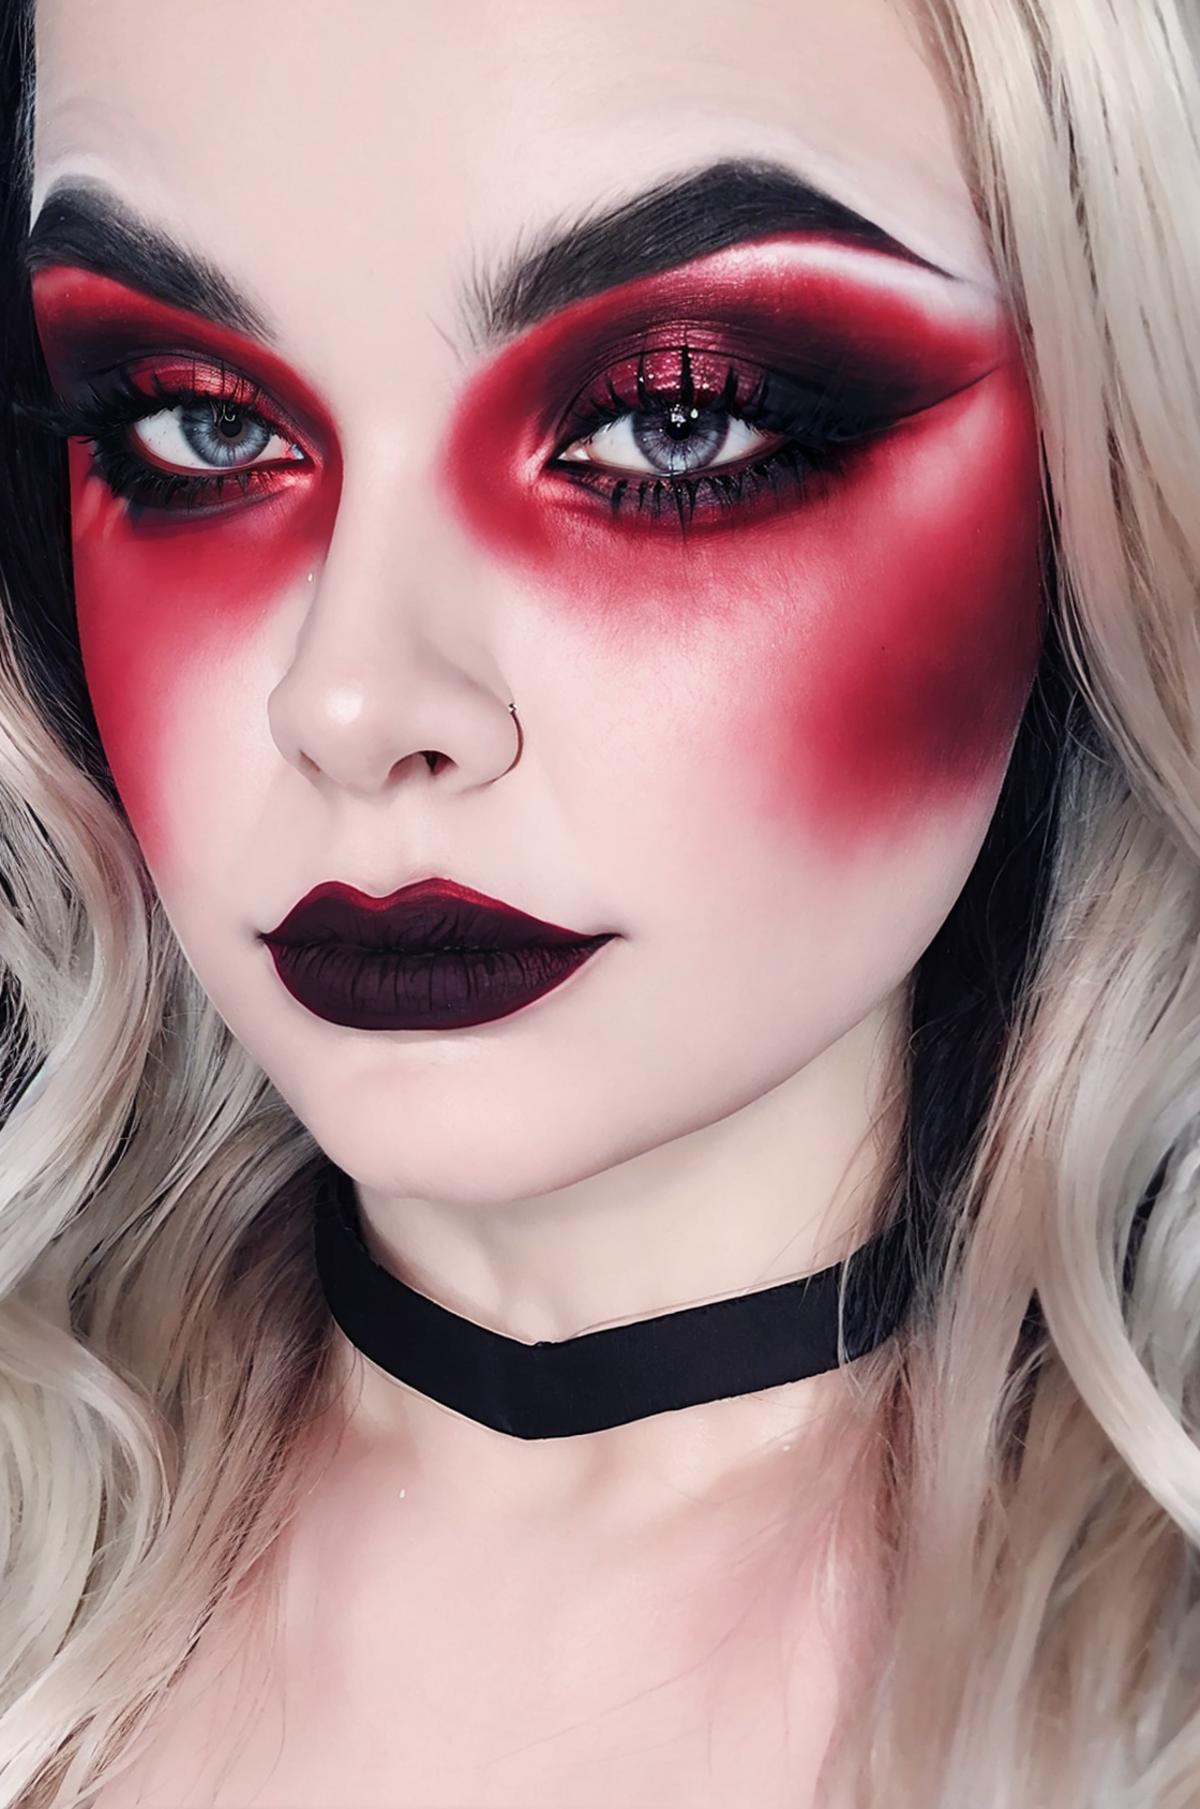 Romantic Goth Makeup image by headupdef